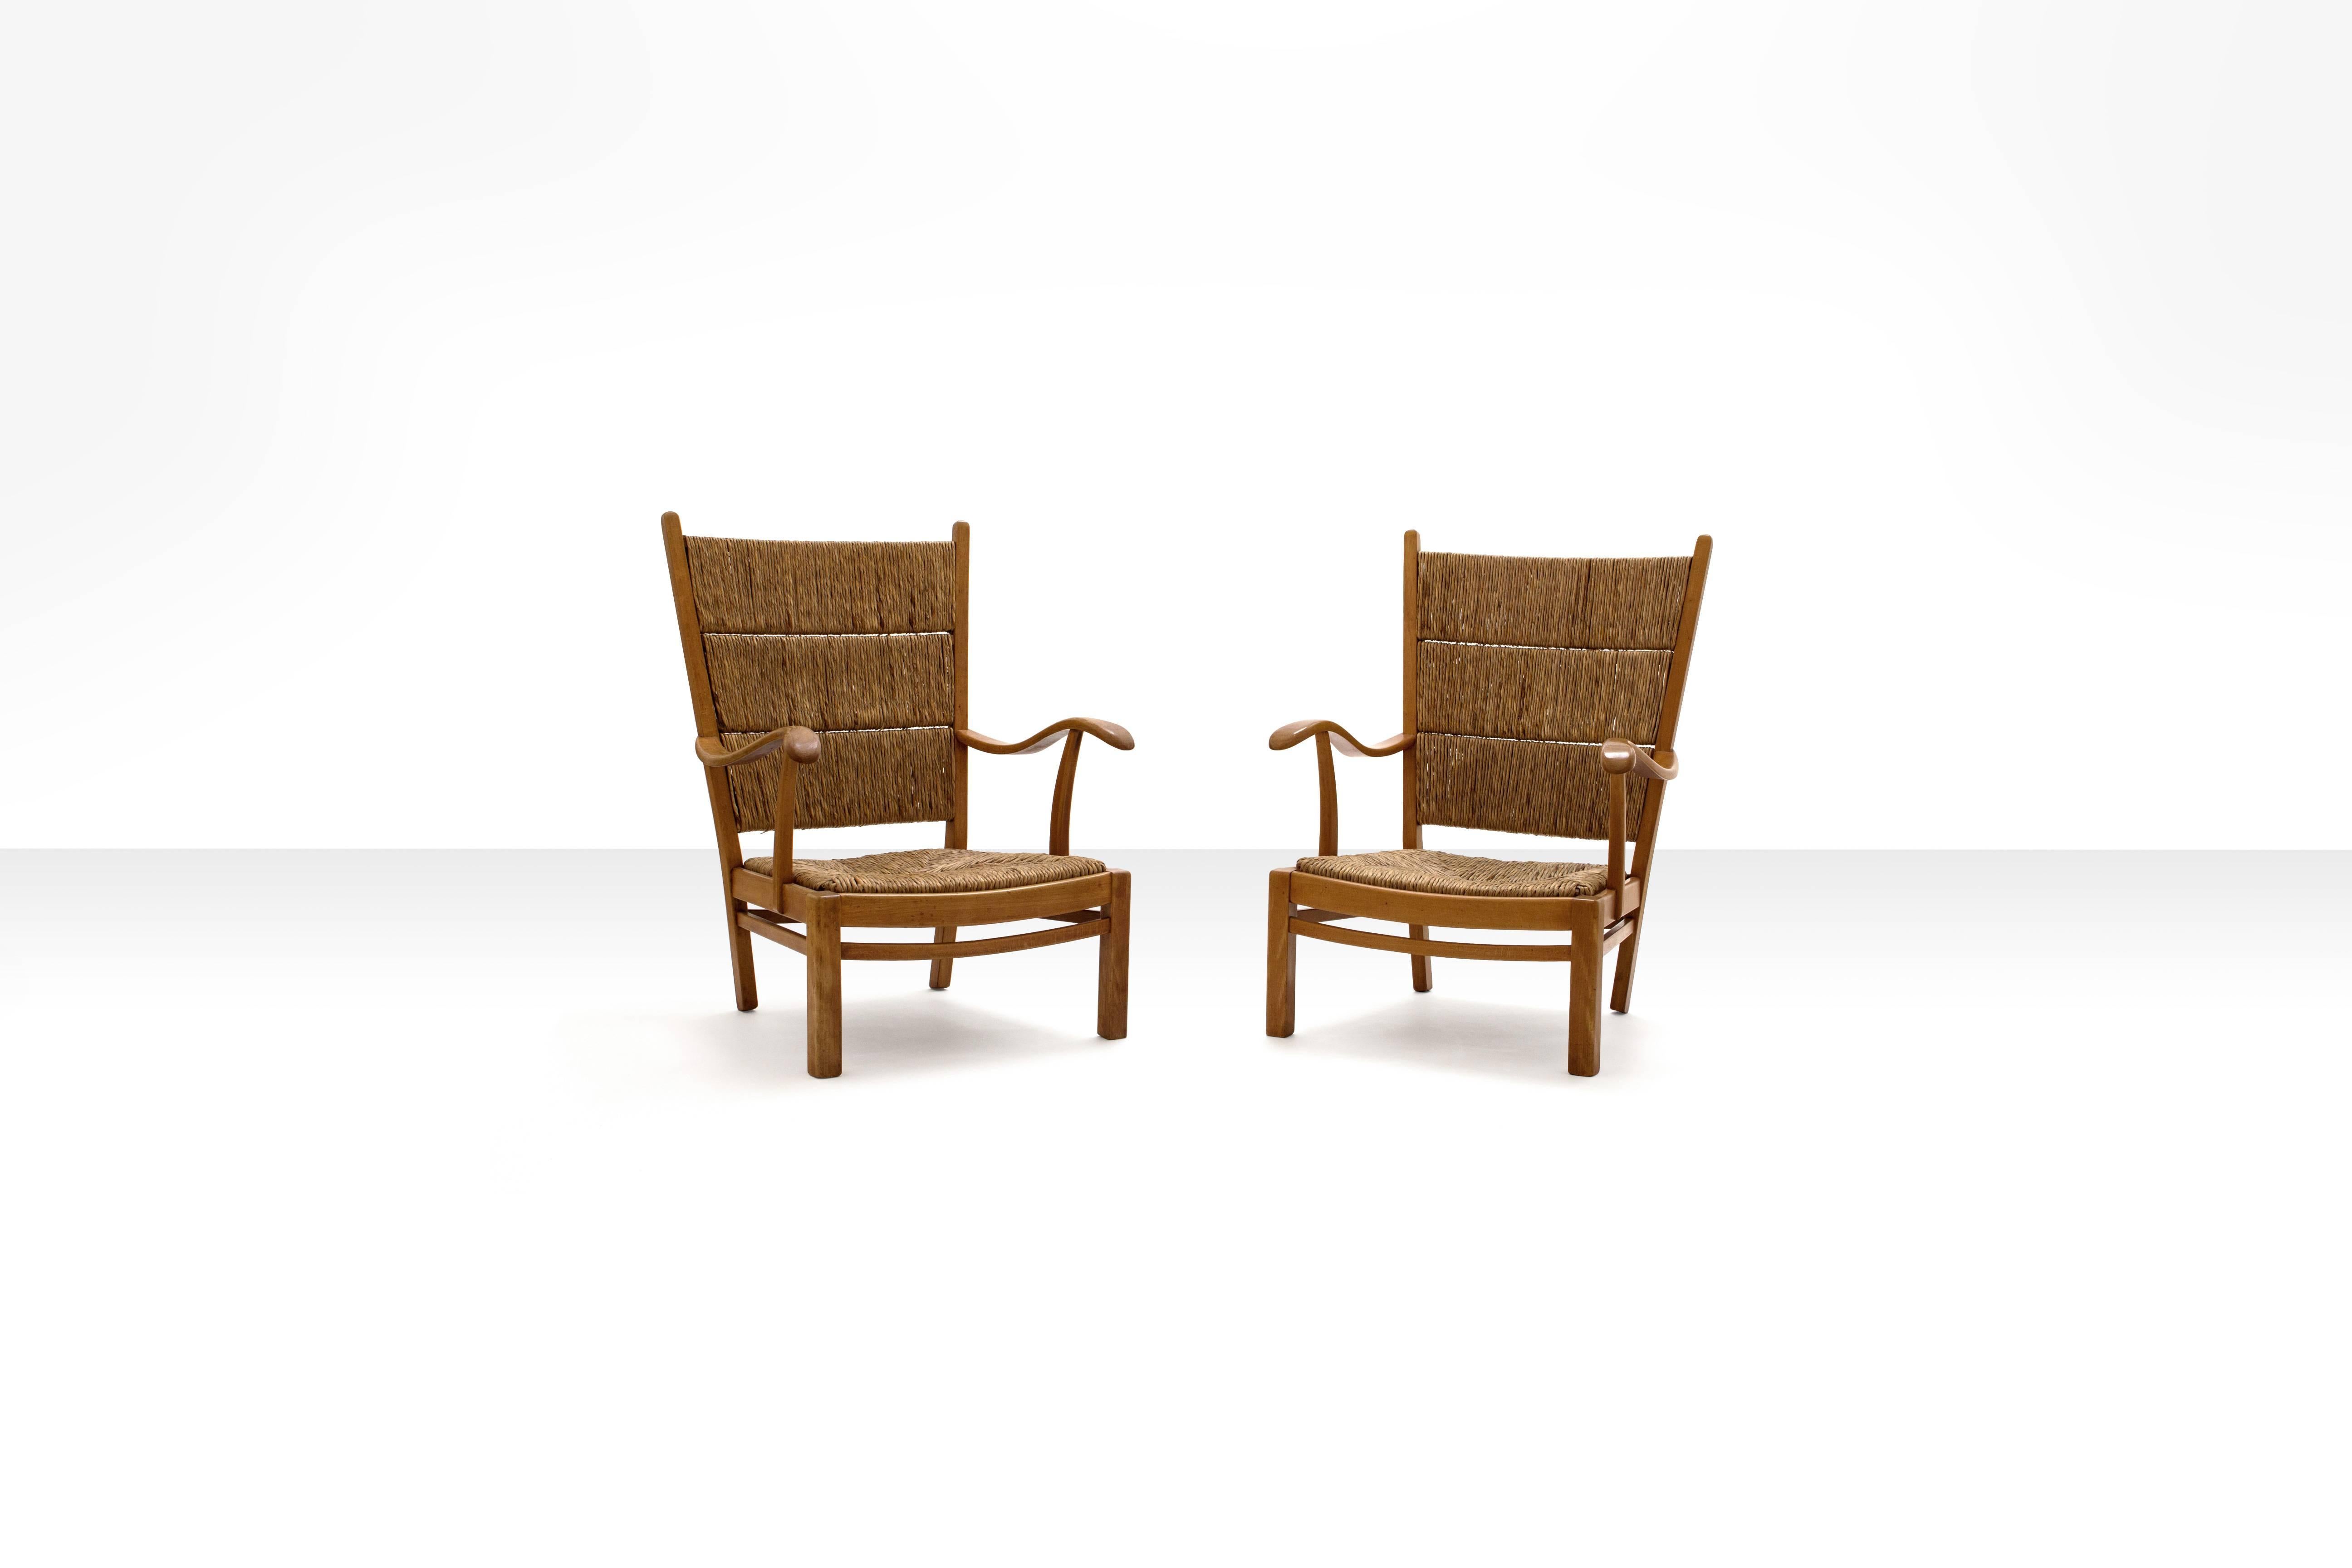 Elegant pair of armchairs in solid oak and straw, designed by Dutch designer Bas Van Pelt. The construction of this rare early 1940s, design is quite traditional and basic, yet very elegant and clear due to the open character of the frame.